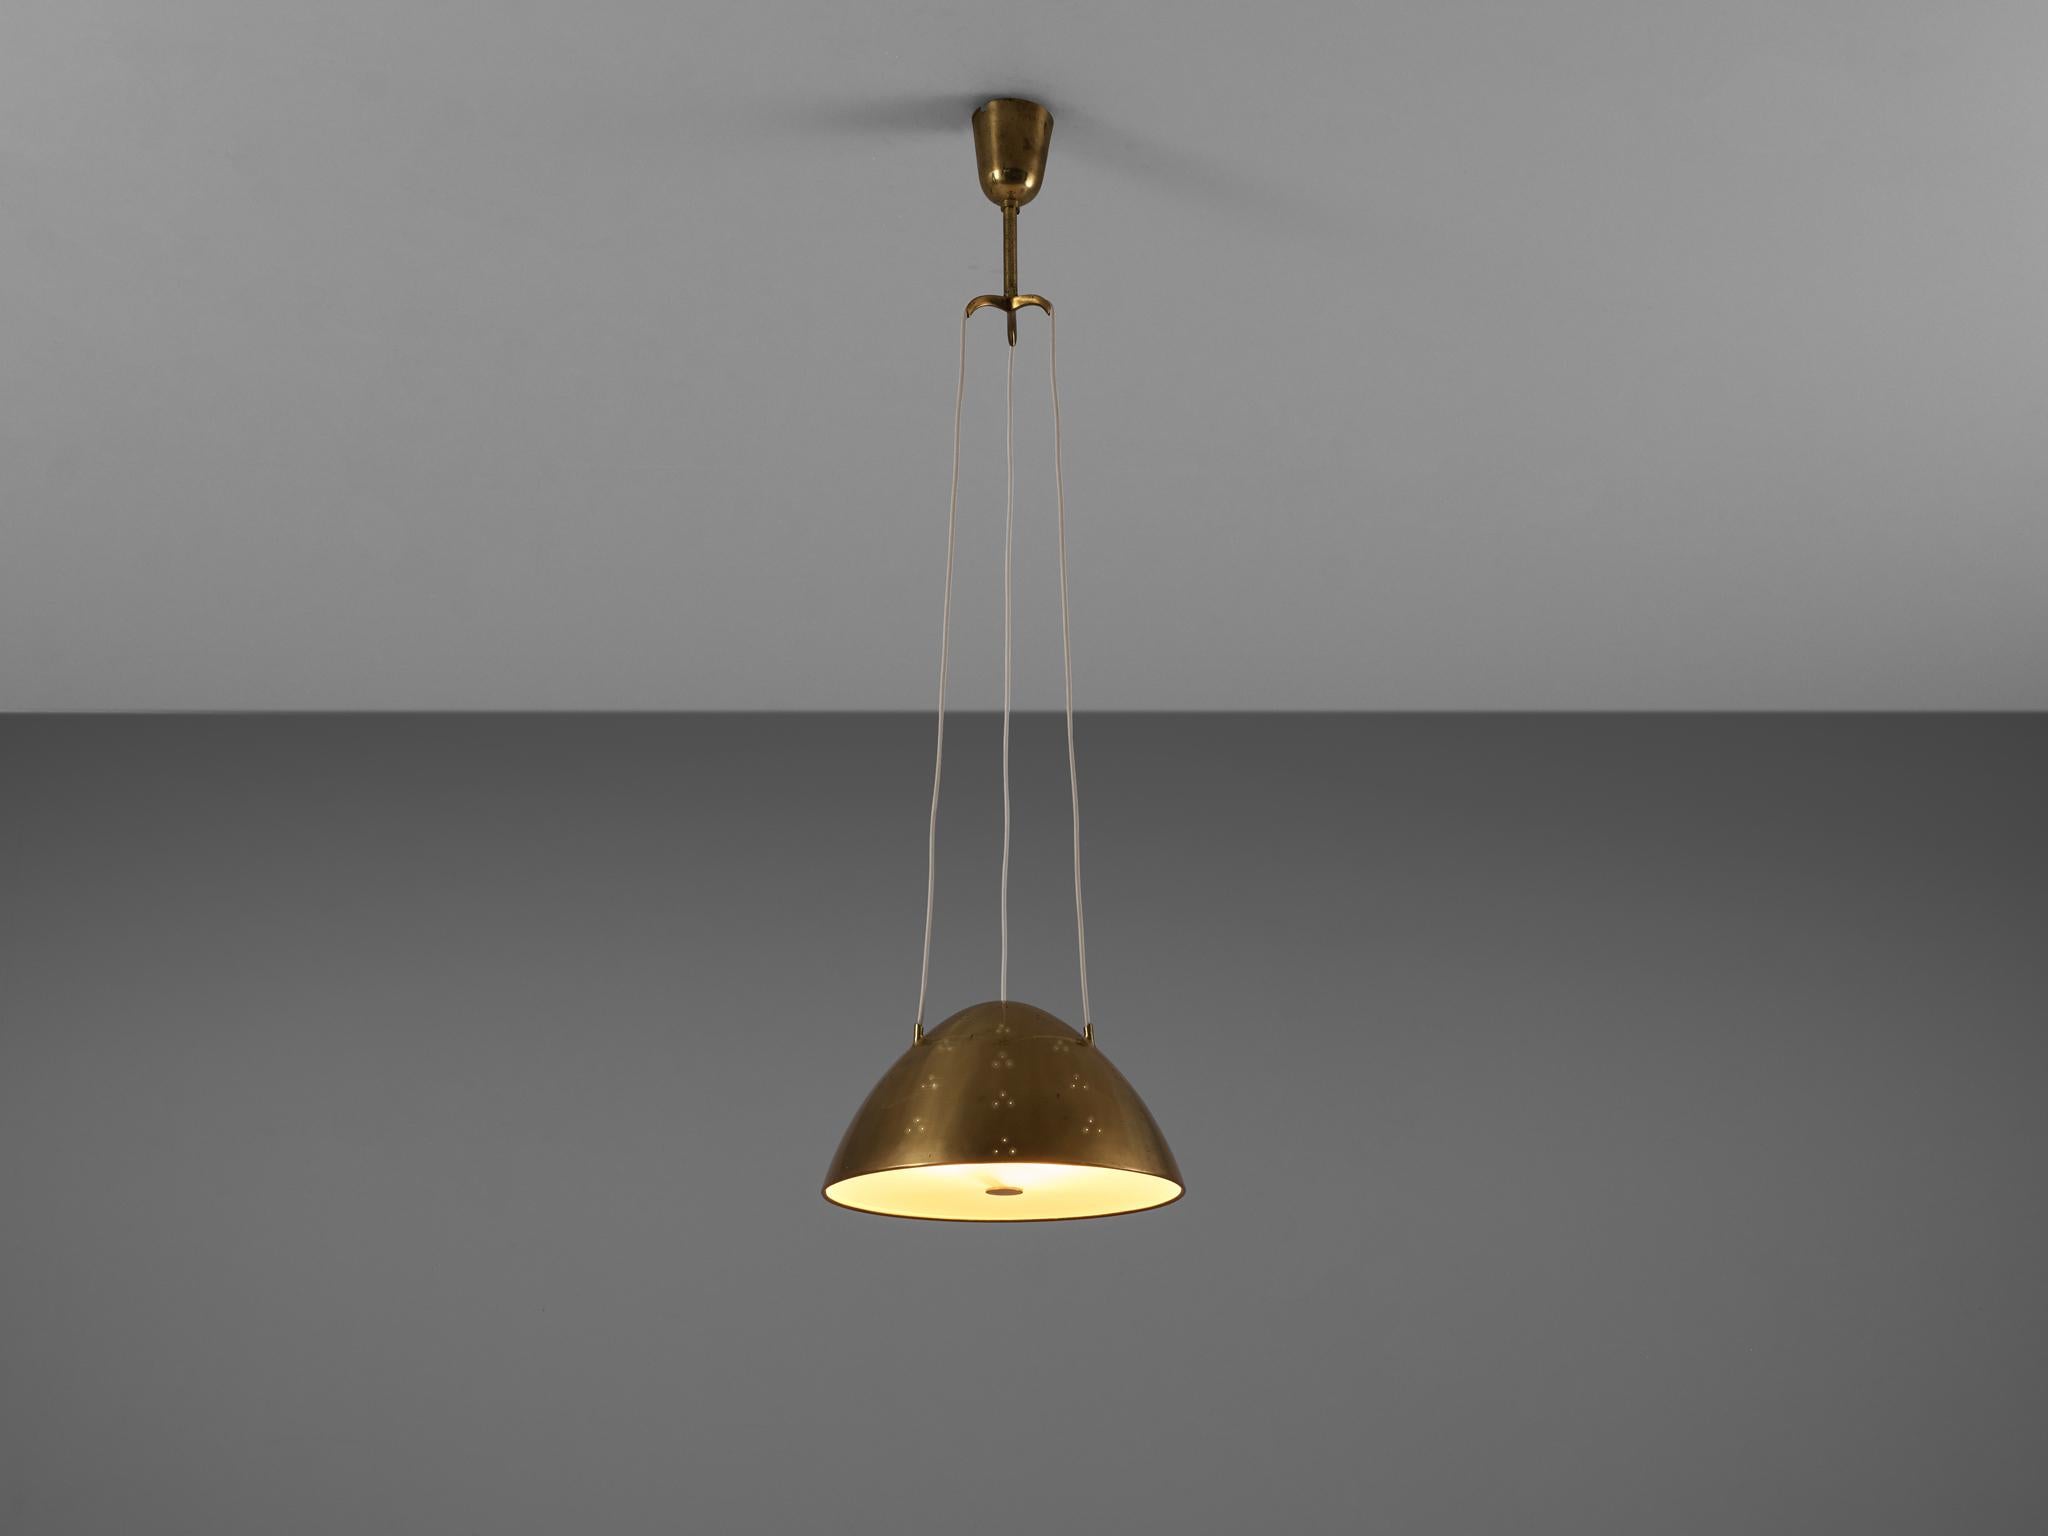 Paavo Tynell for Taito Oy, pendant lamp model 1959, brass, glass, Finland, 1950s

Dome-shaped pendant lamp by Finnish designer Paavo Tynell. The model ‘1959’ features all characteristics of Tynell’s fabulous designs. A wonderfully formed lampshade